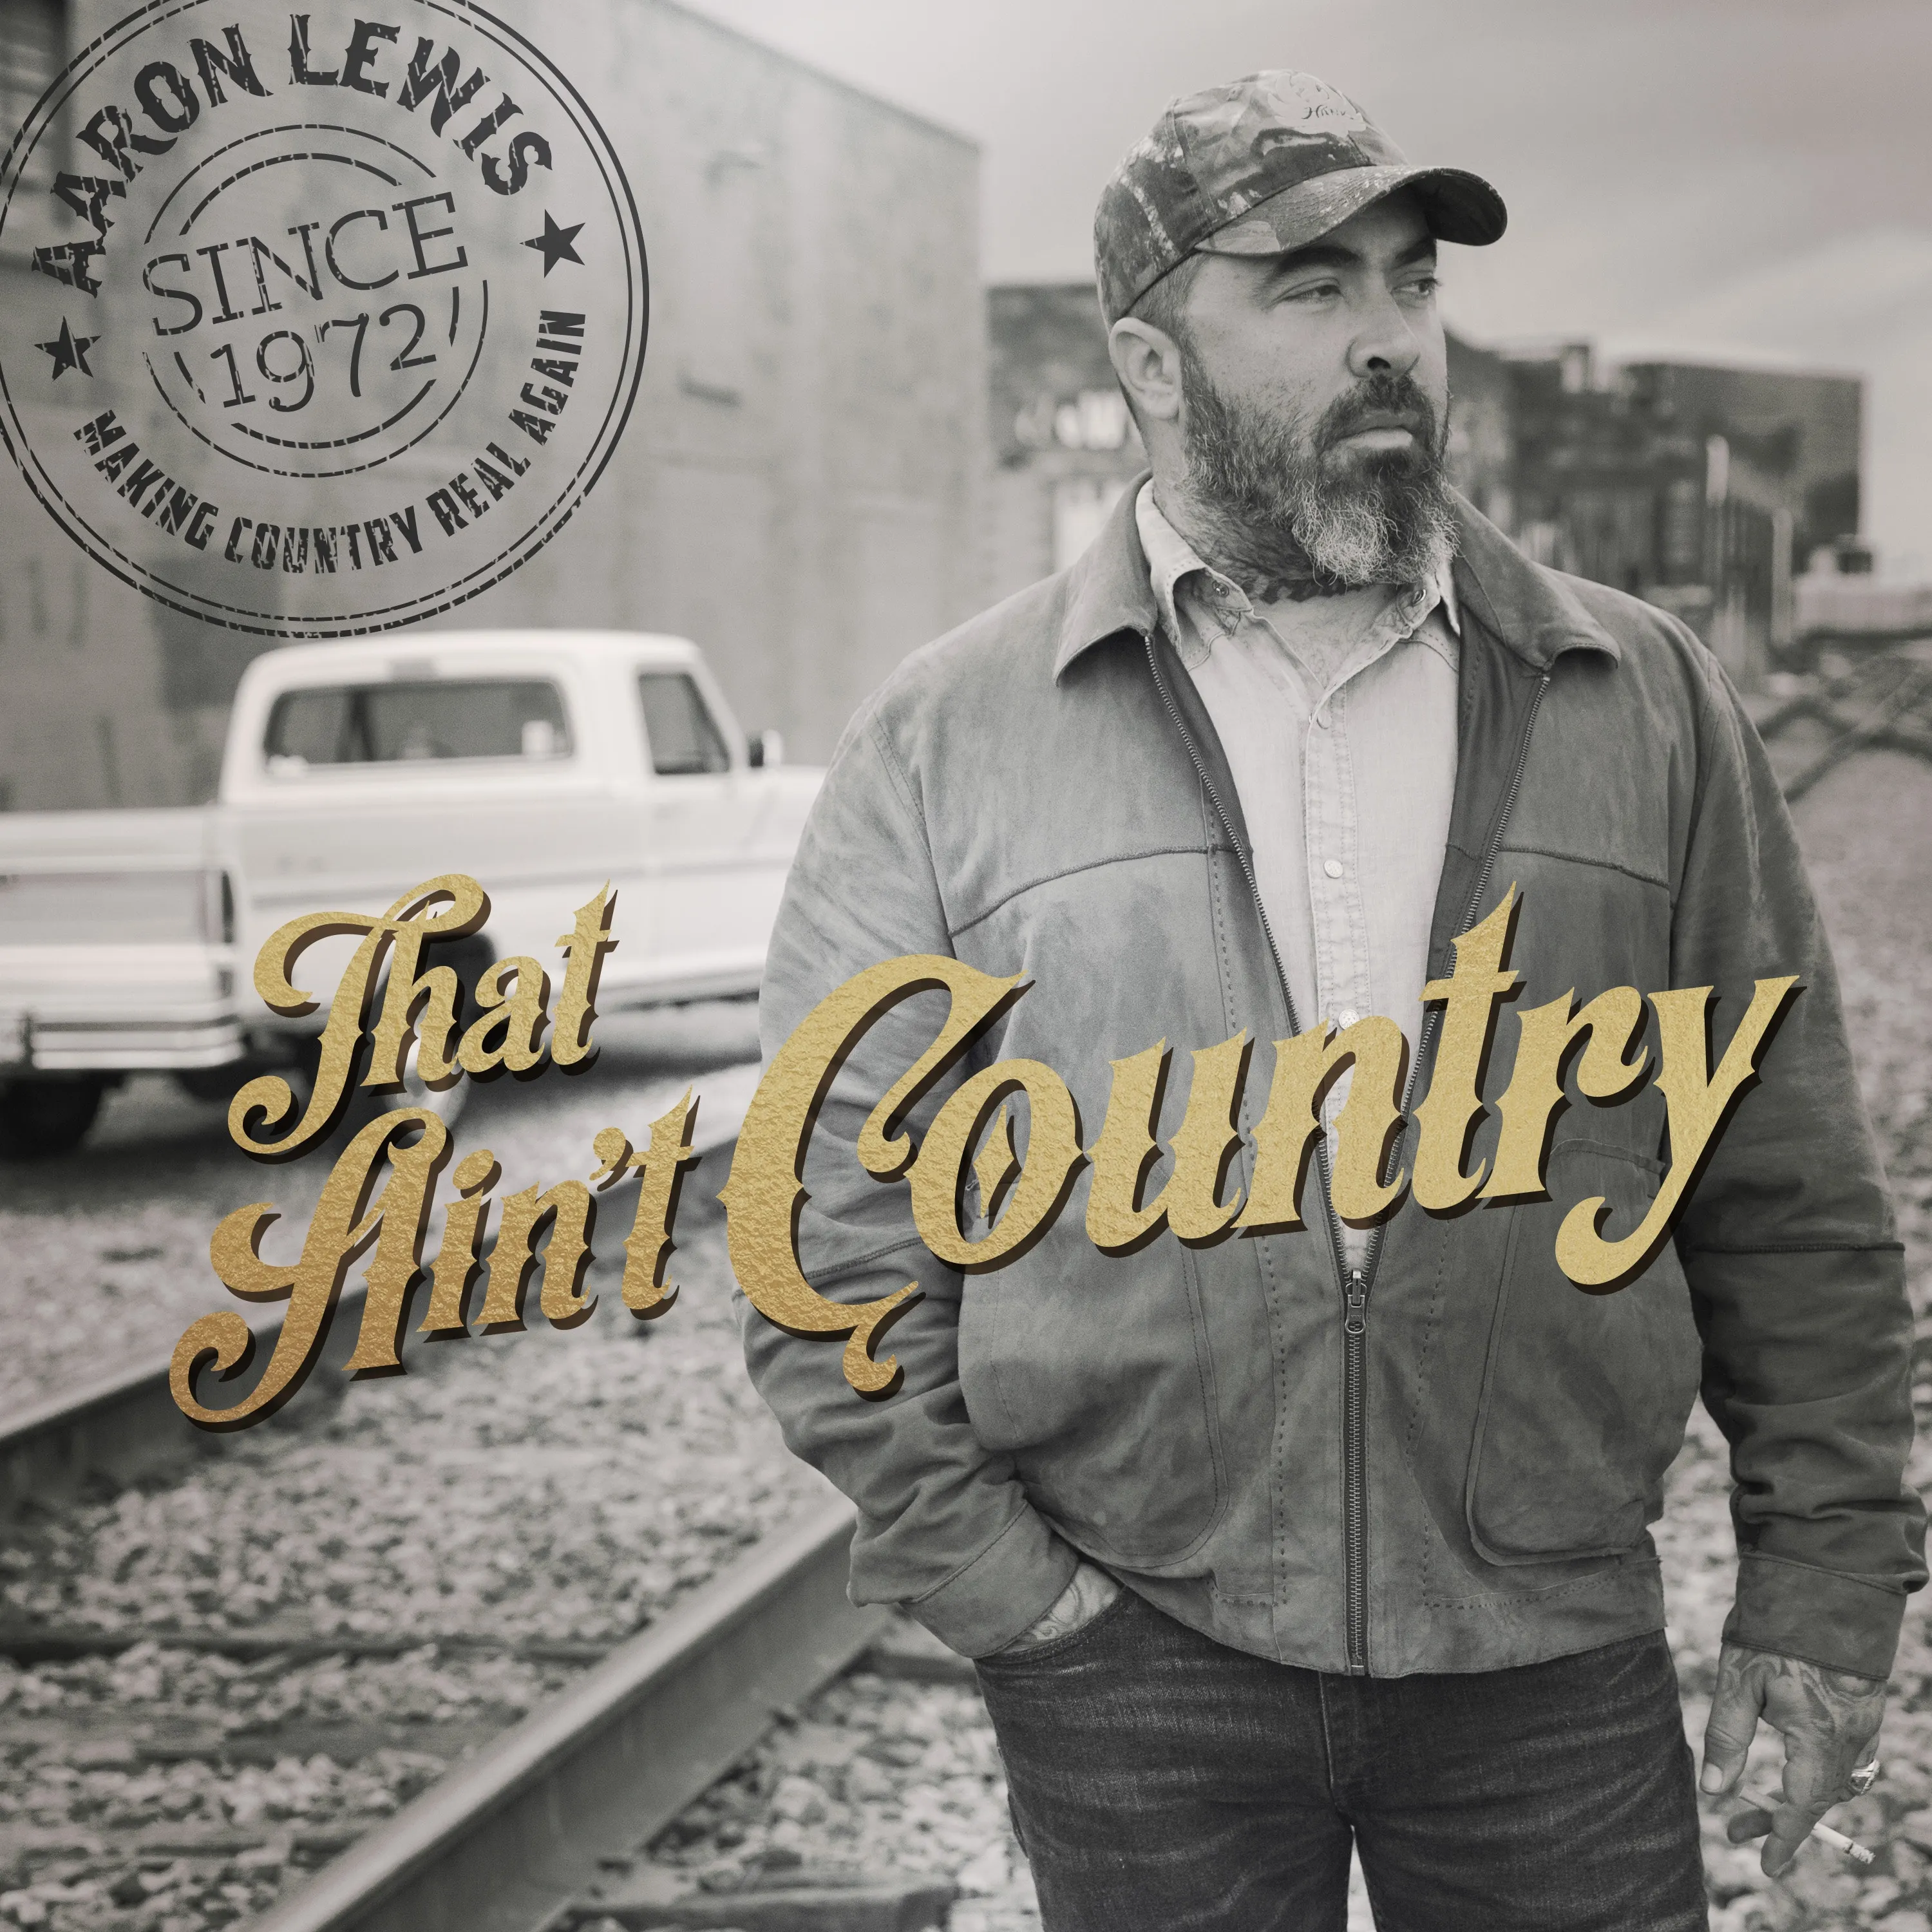 Video Premiere: Aaron Lewis, “That Ain’t Country”